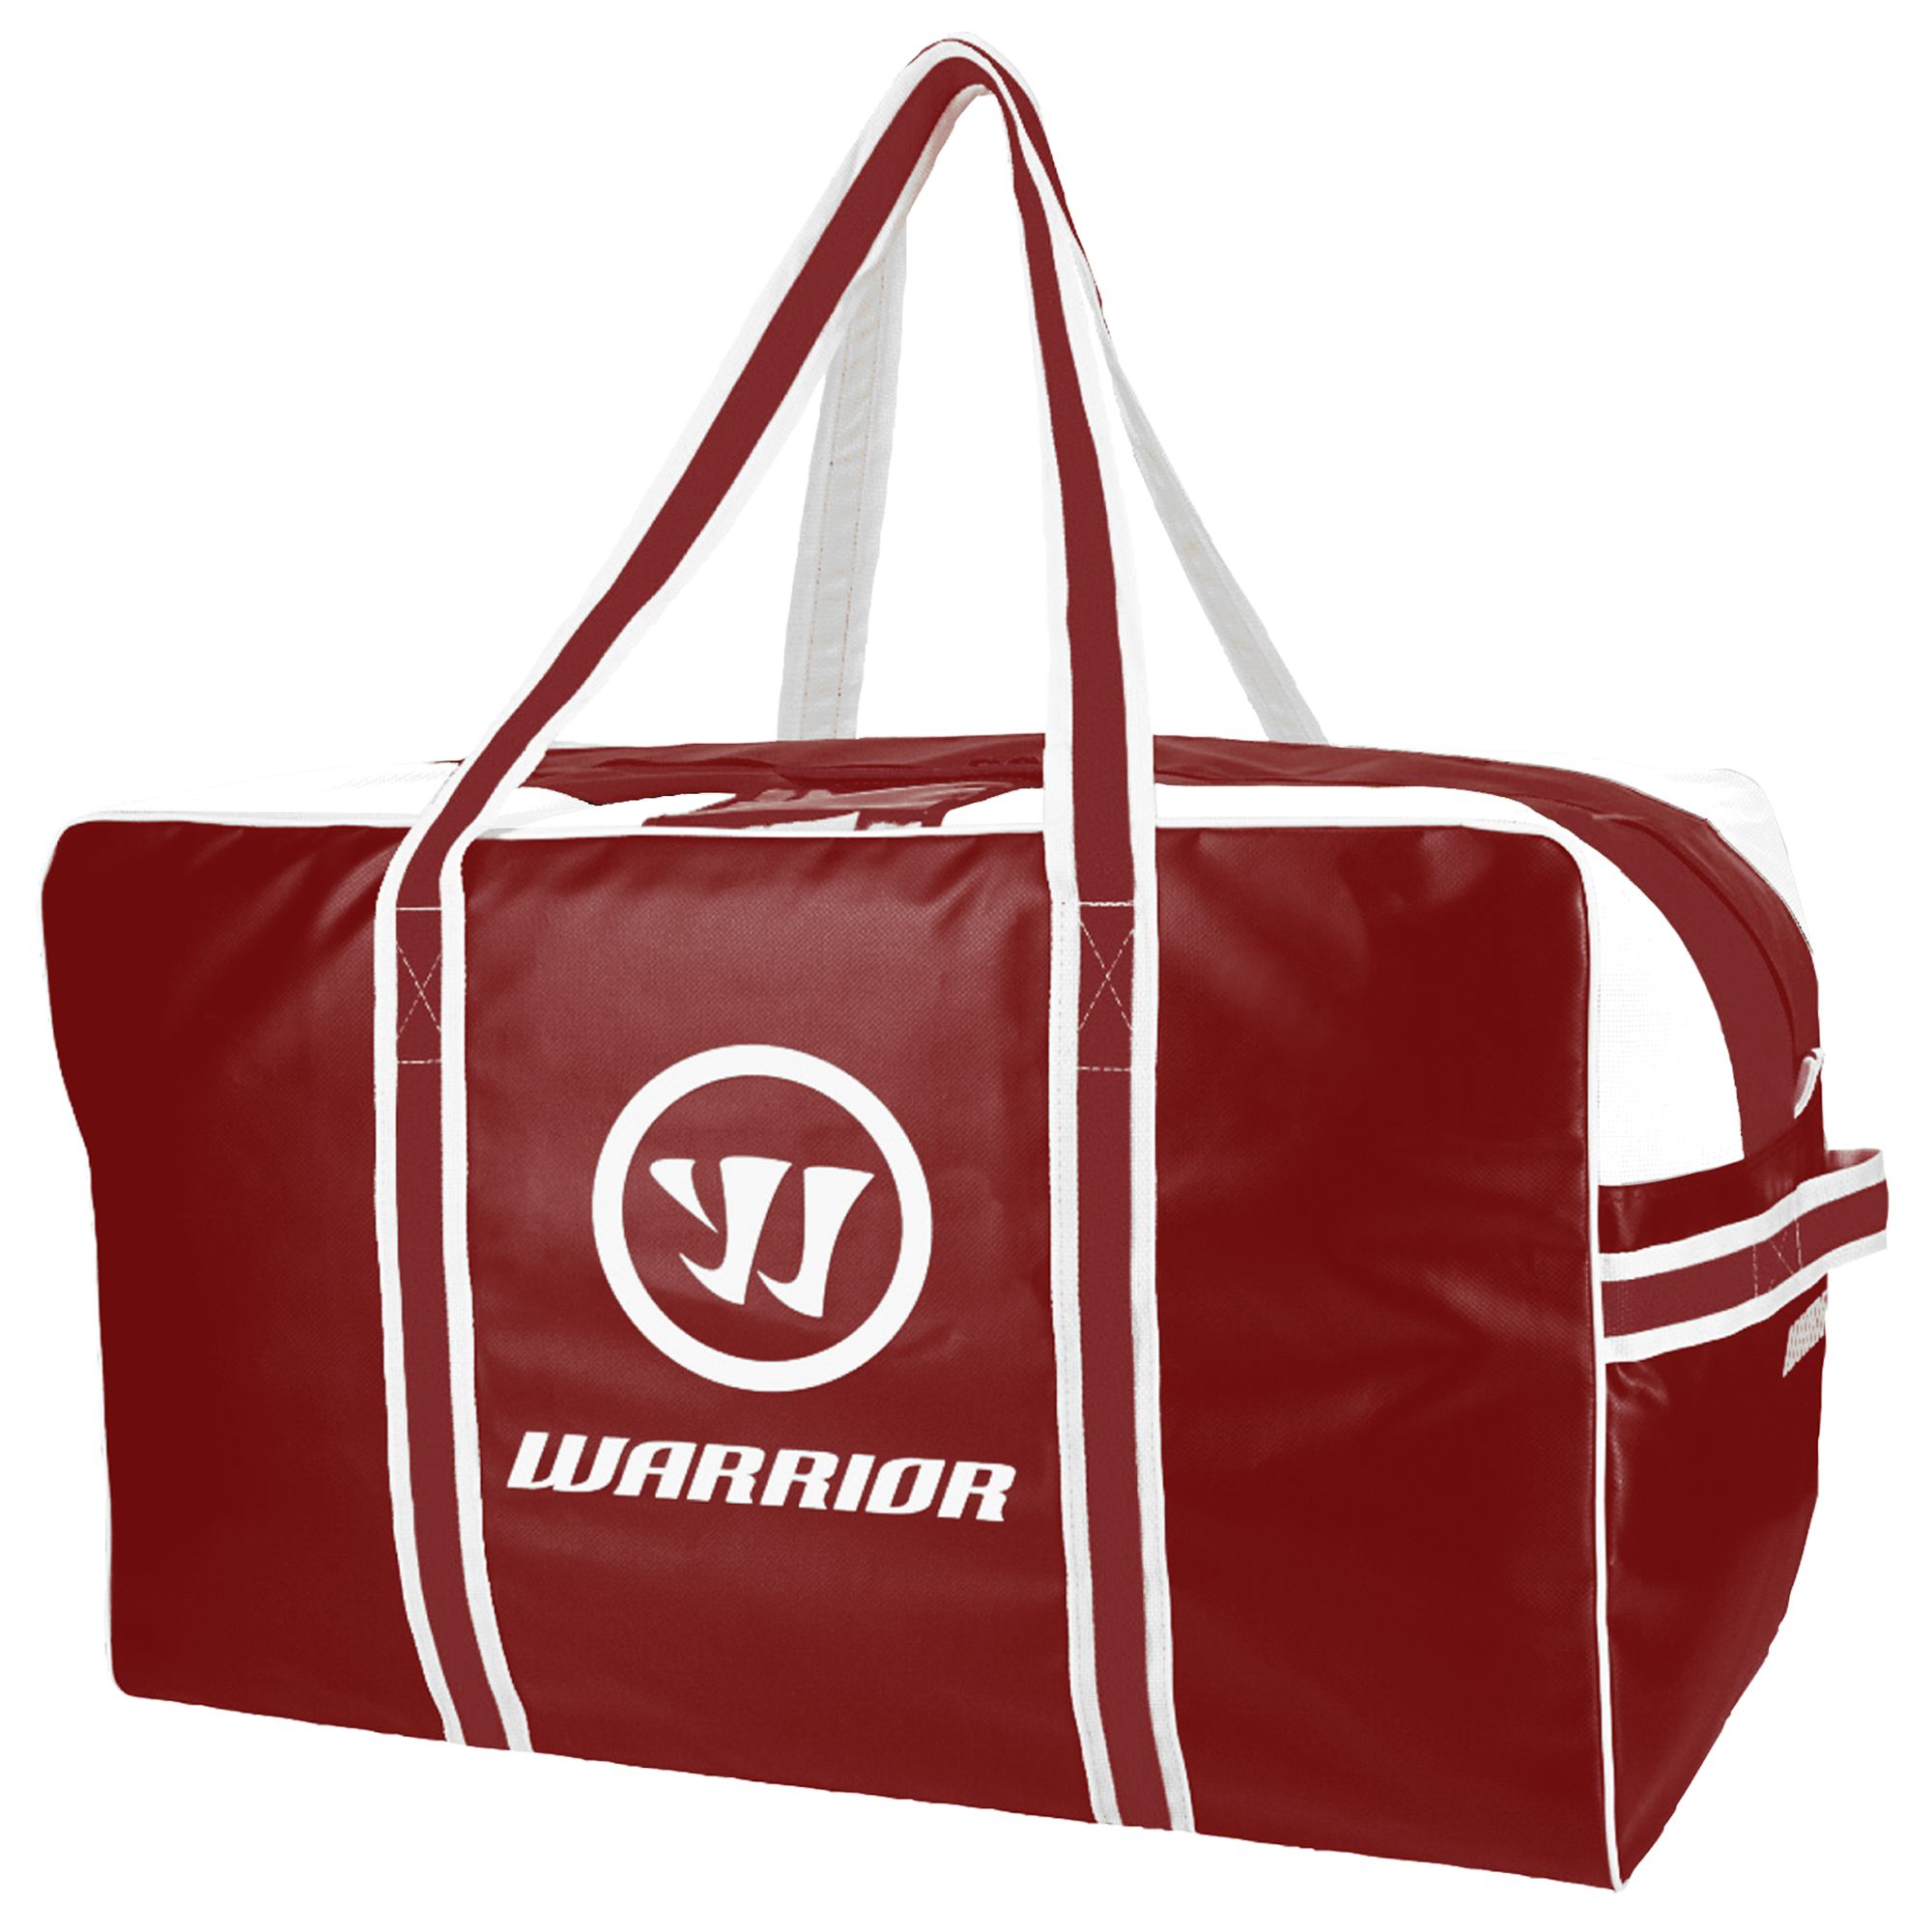 Warrior Pro Bag, Maroon with White image number 1